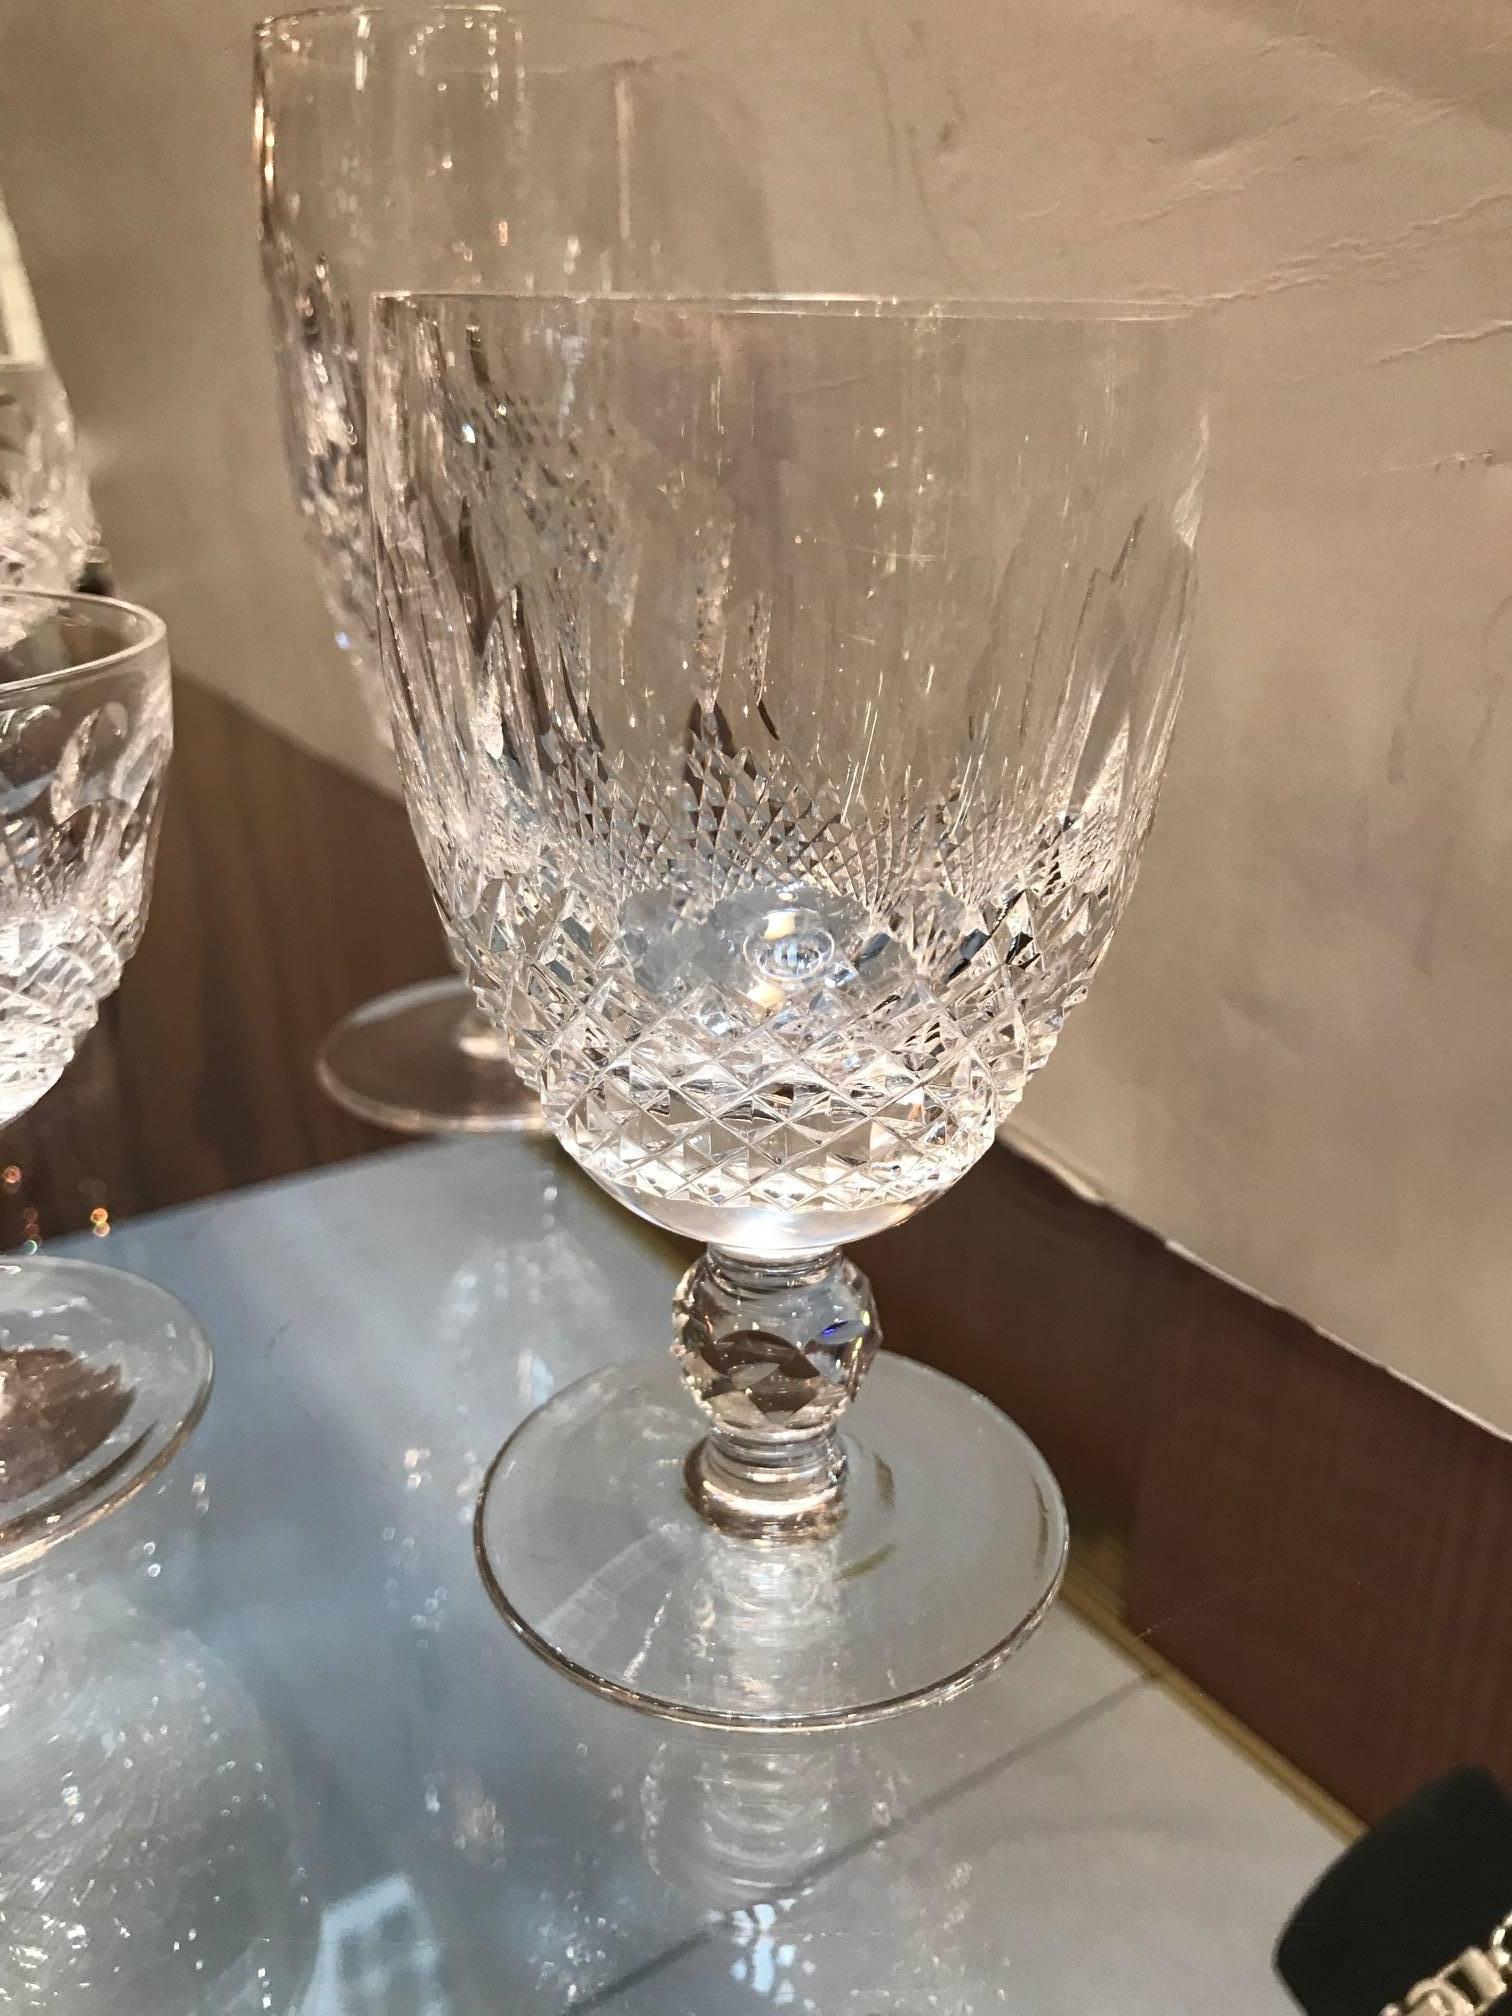 An extensive set of Waterford Irish crystal with 12 pcs of 5 sized stems. This is the original Waterford handcut and polished crystal by master glass cutters for Waterford The pattern is the most desirable Colleen pattern. These were the handcut